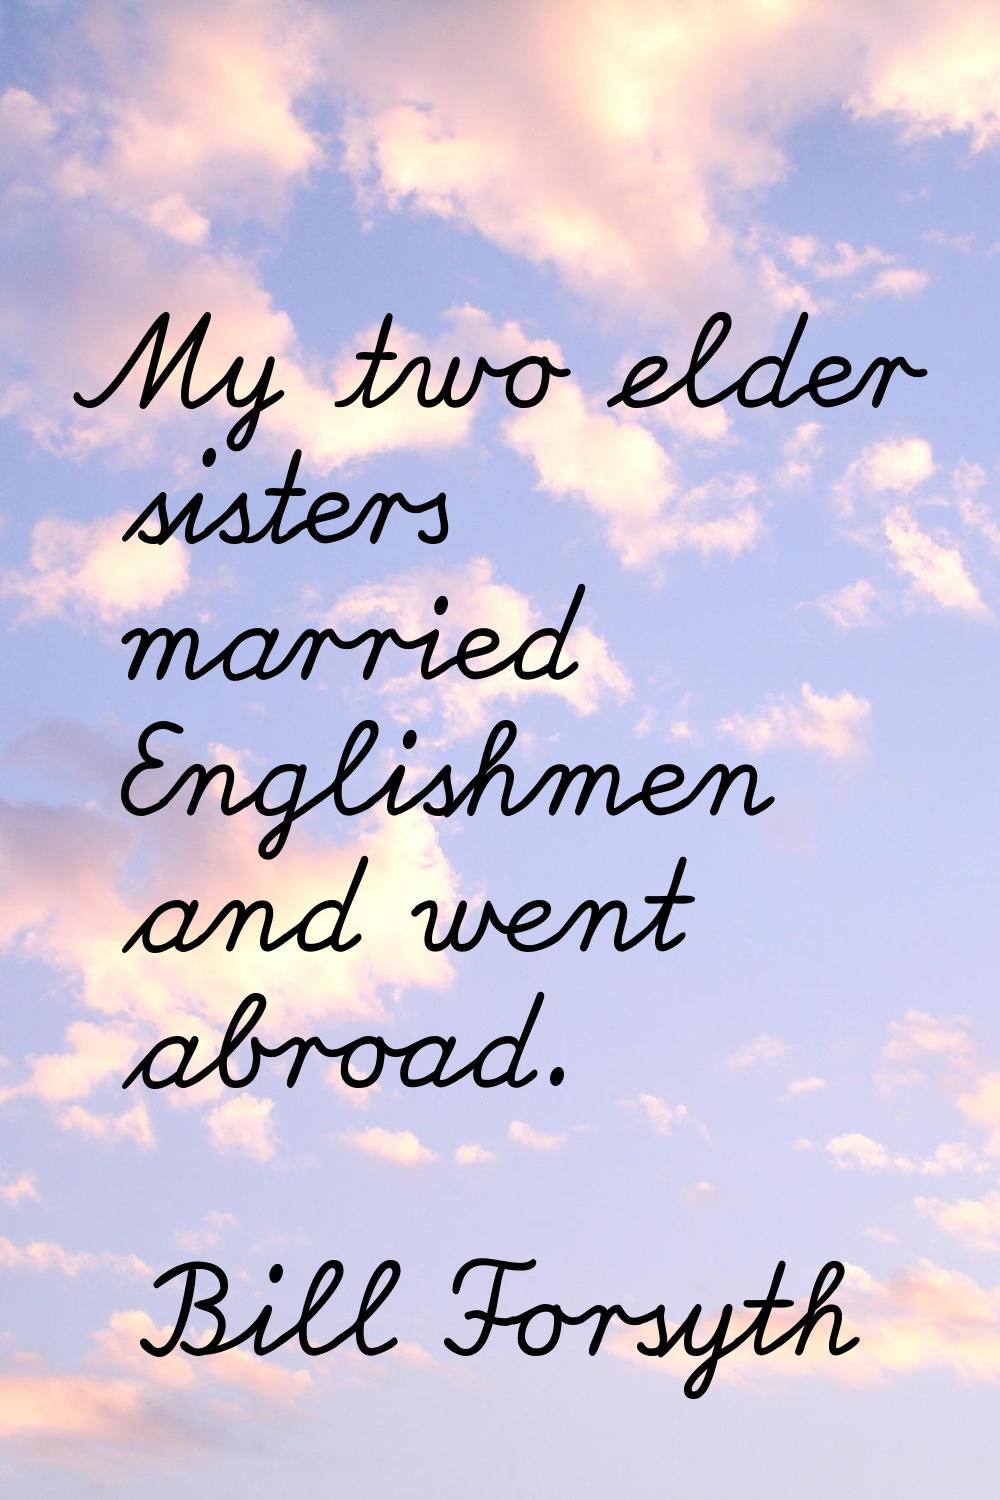 My two elder sisters married Englishmen and went abroad.